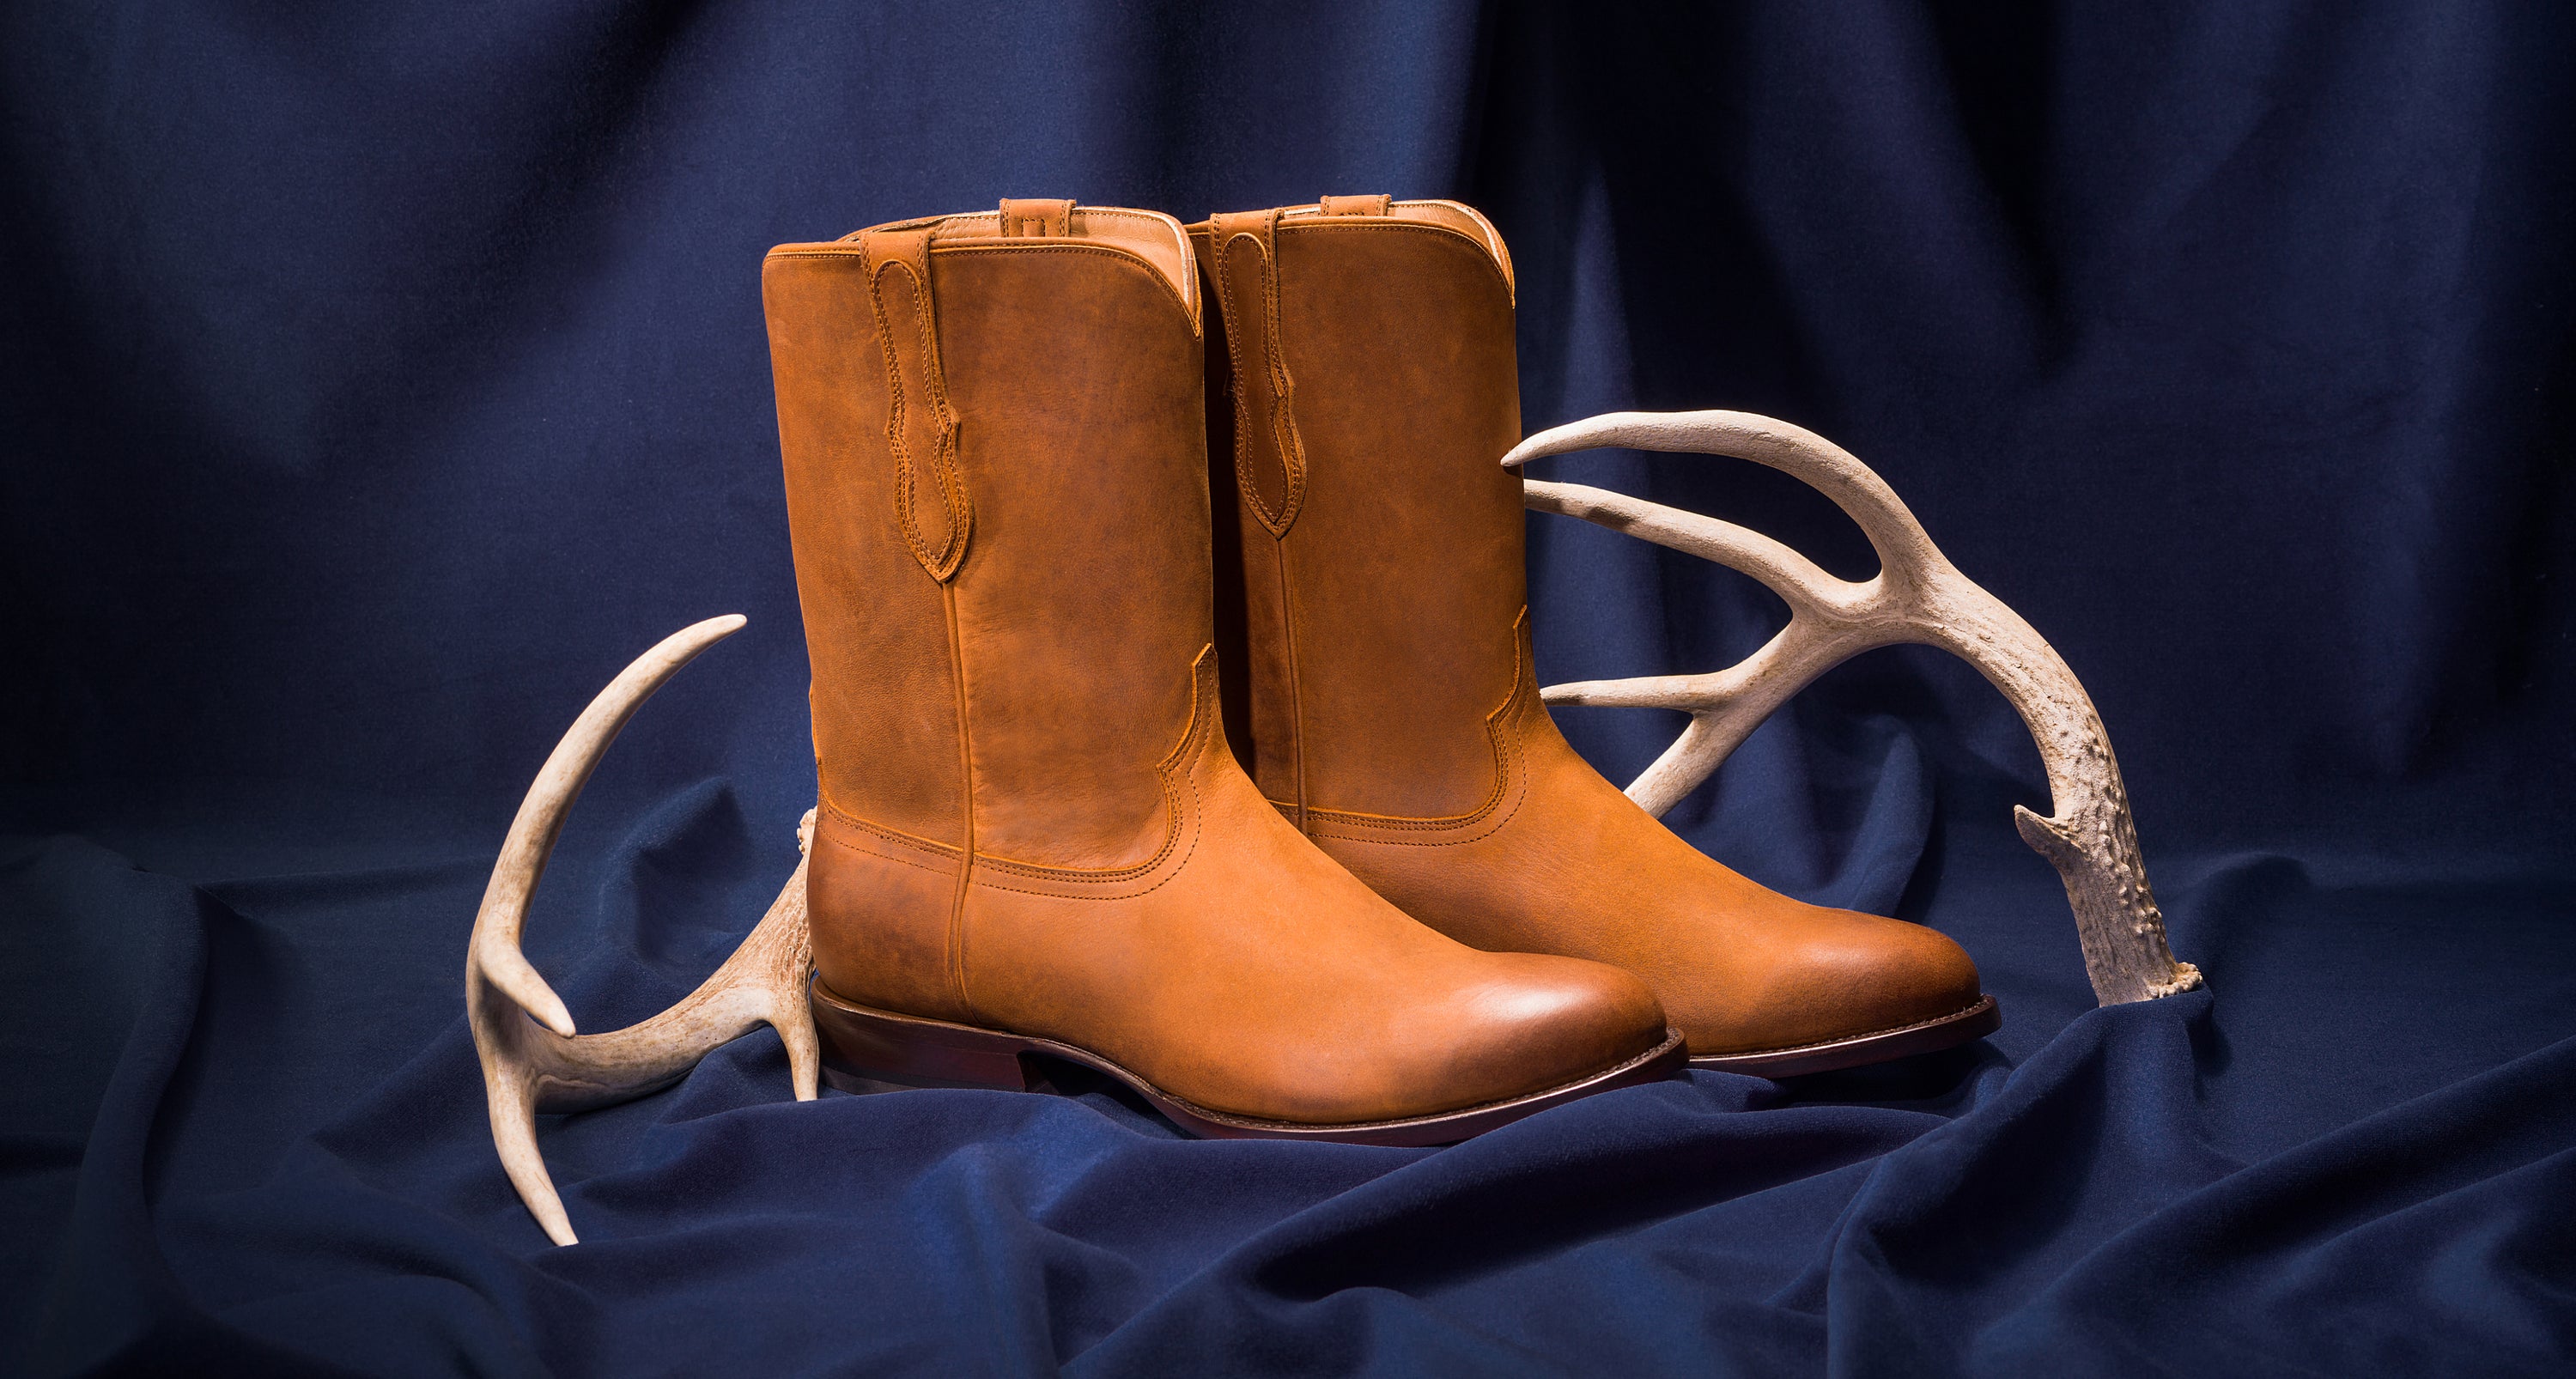 A pair of men's RUJO calfskin cowboy boots set next to a pair of antlers